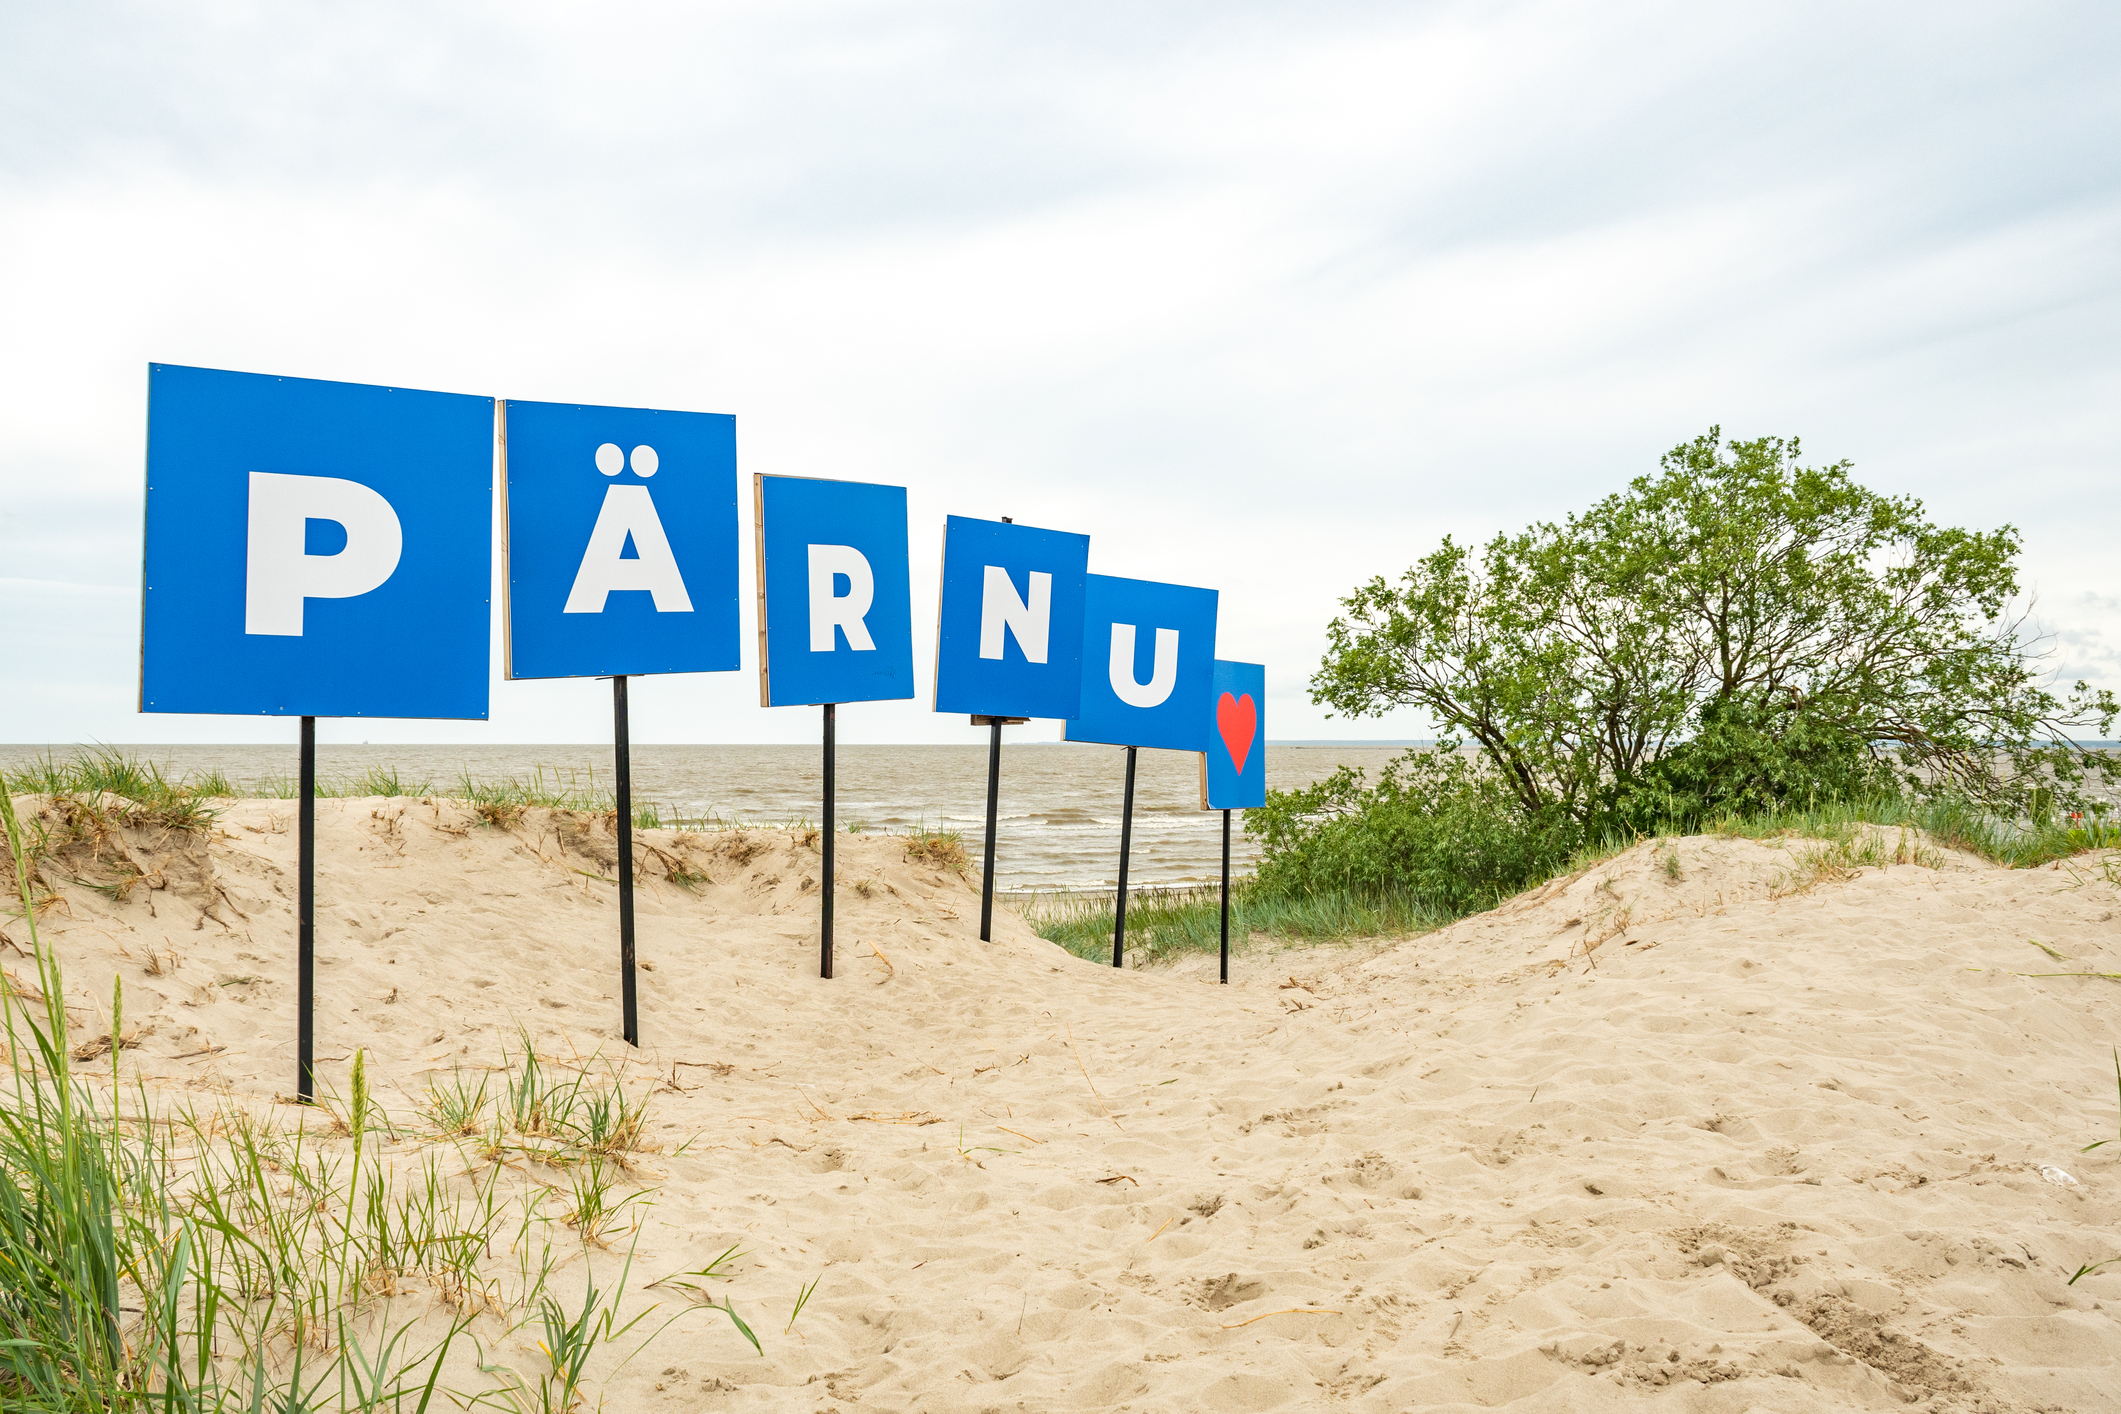 Parnu, Estonia Europe, Name Of The City On The Sandy Beach And Dunes